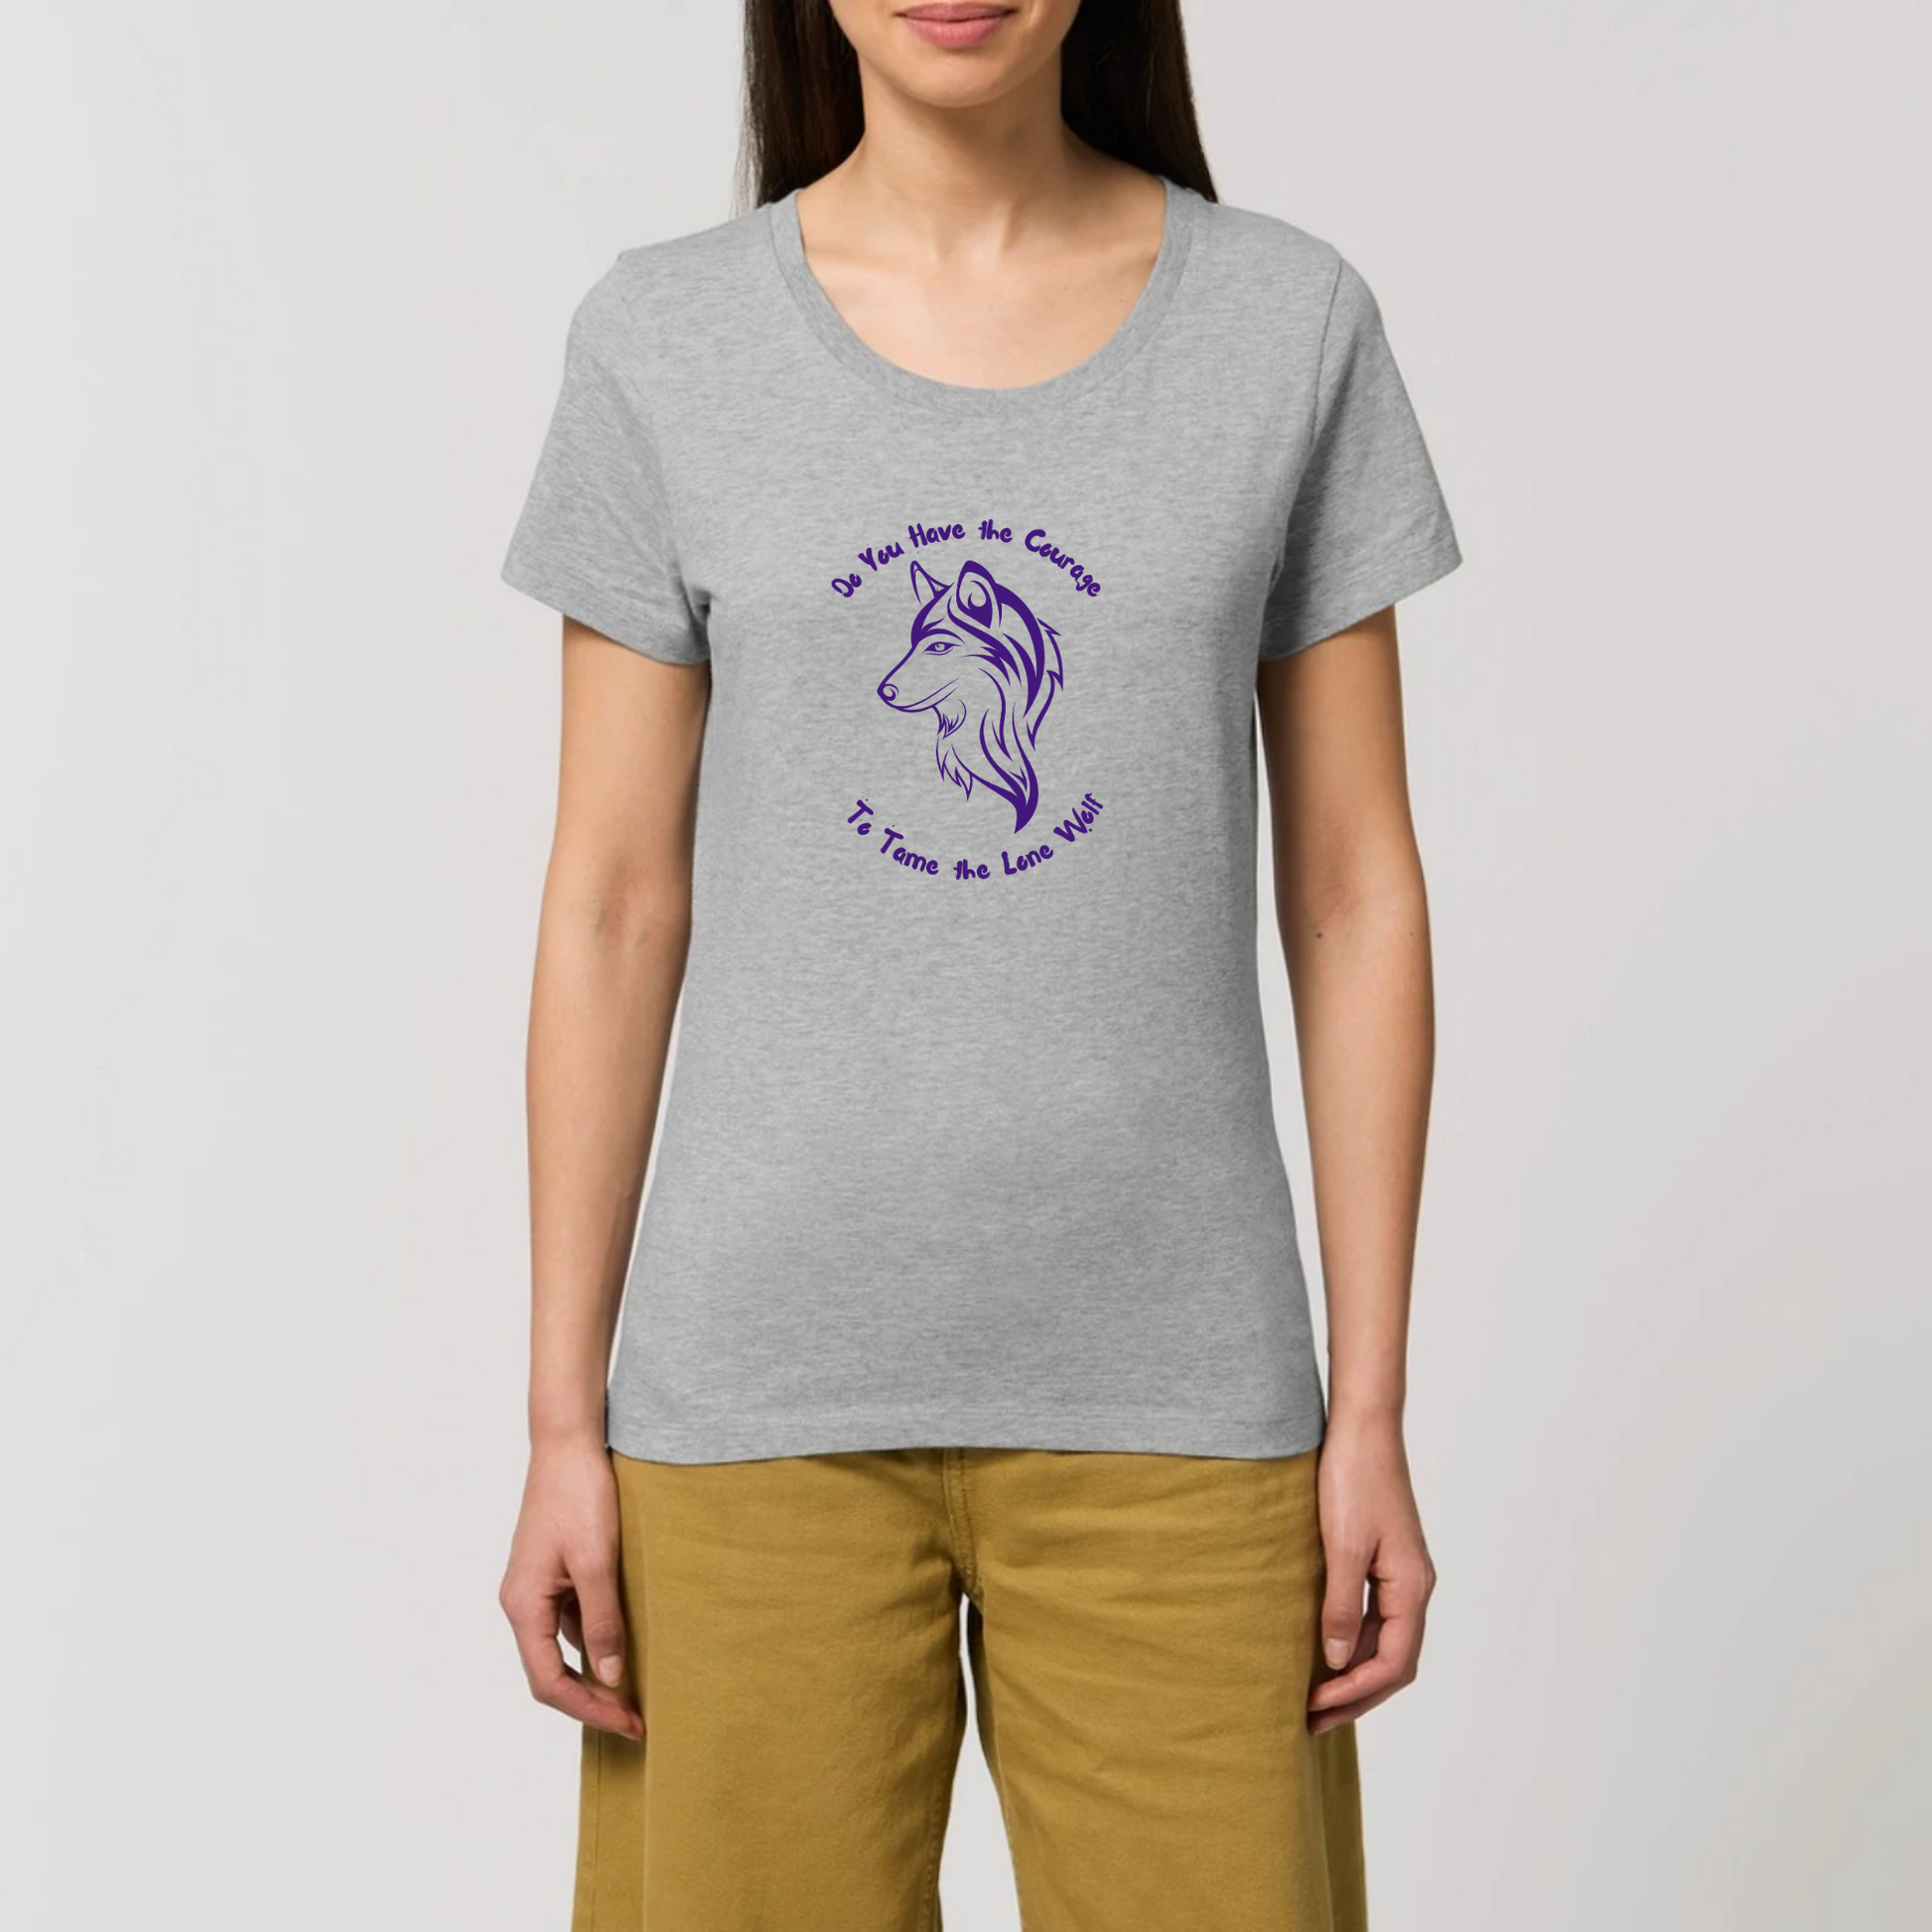 Graphic design t-shirt for women which features a feminine wolf head with wording above and below the wolf head saying Do You Have the Courage to Tame the Lone Wolf. The t-shirt is grey